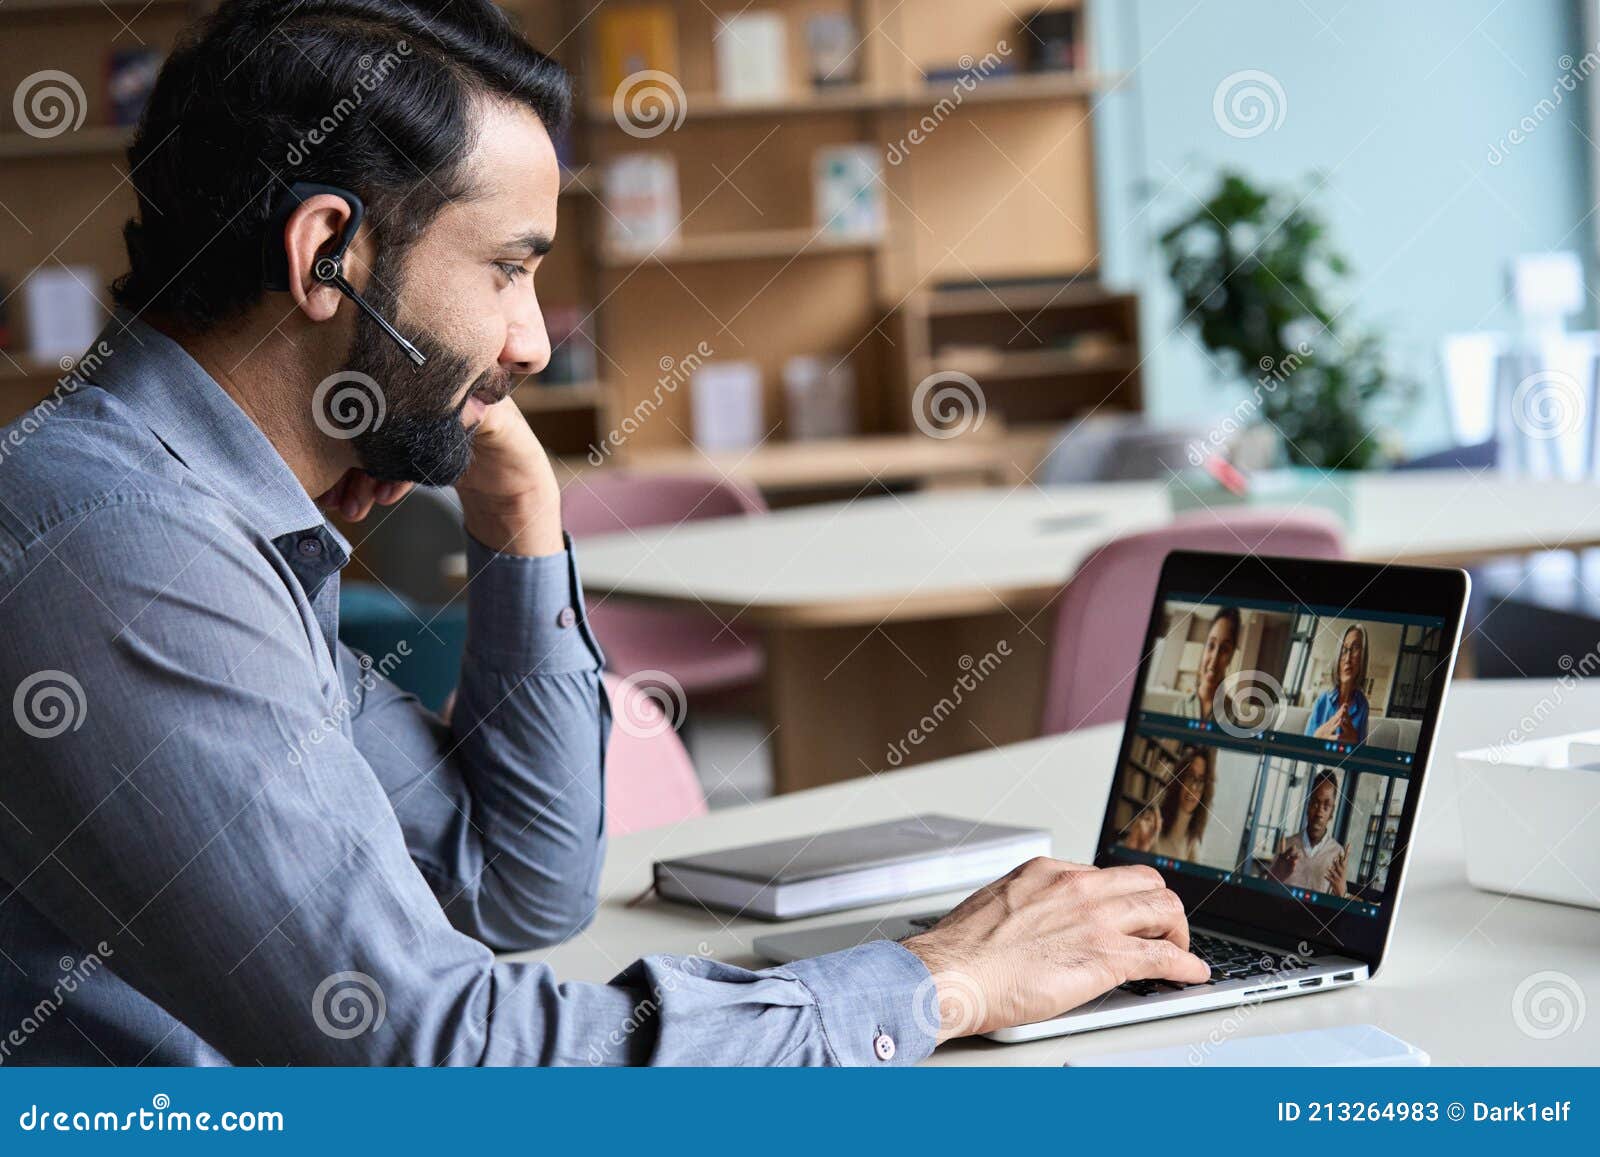 indian business man having virtual team meeting on video conference call.